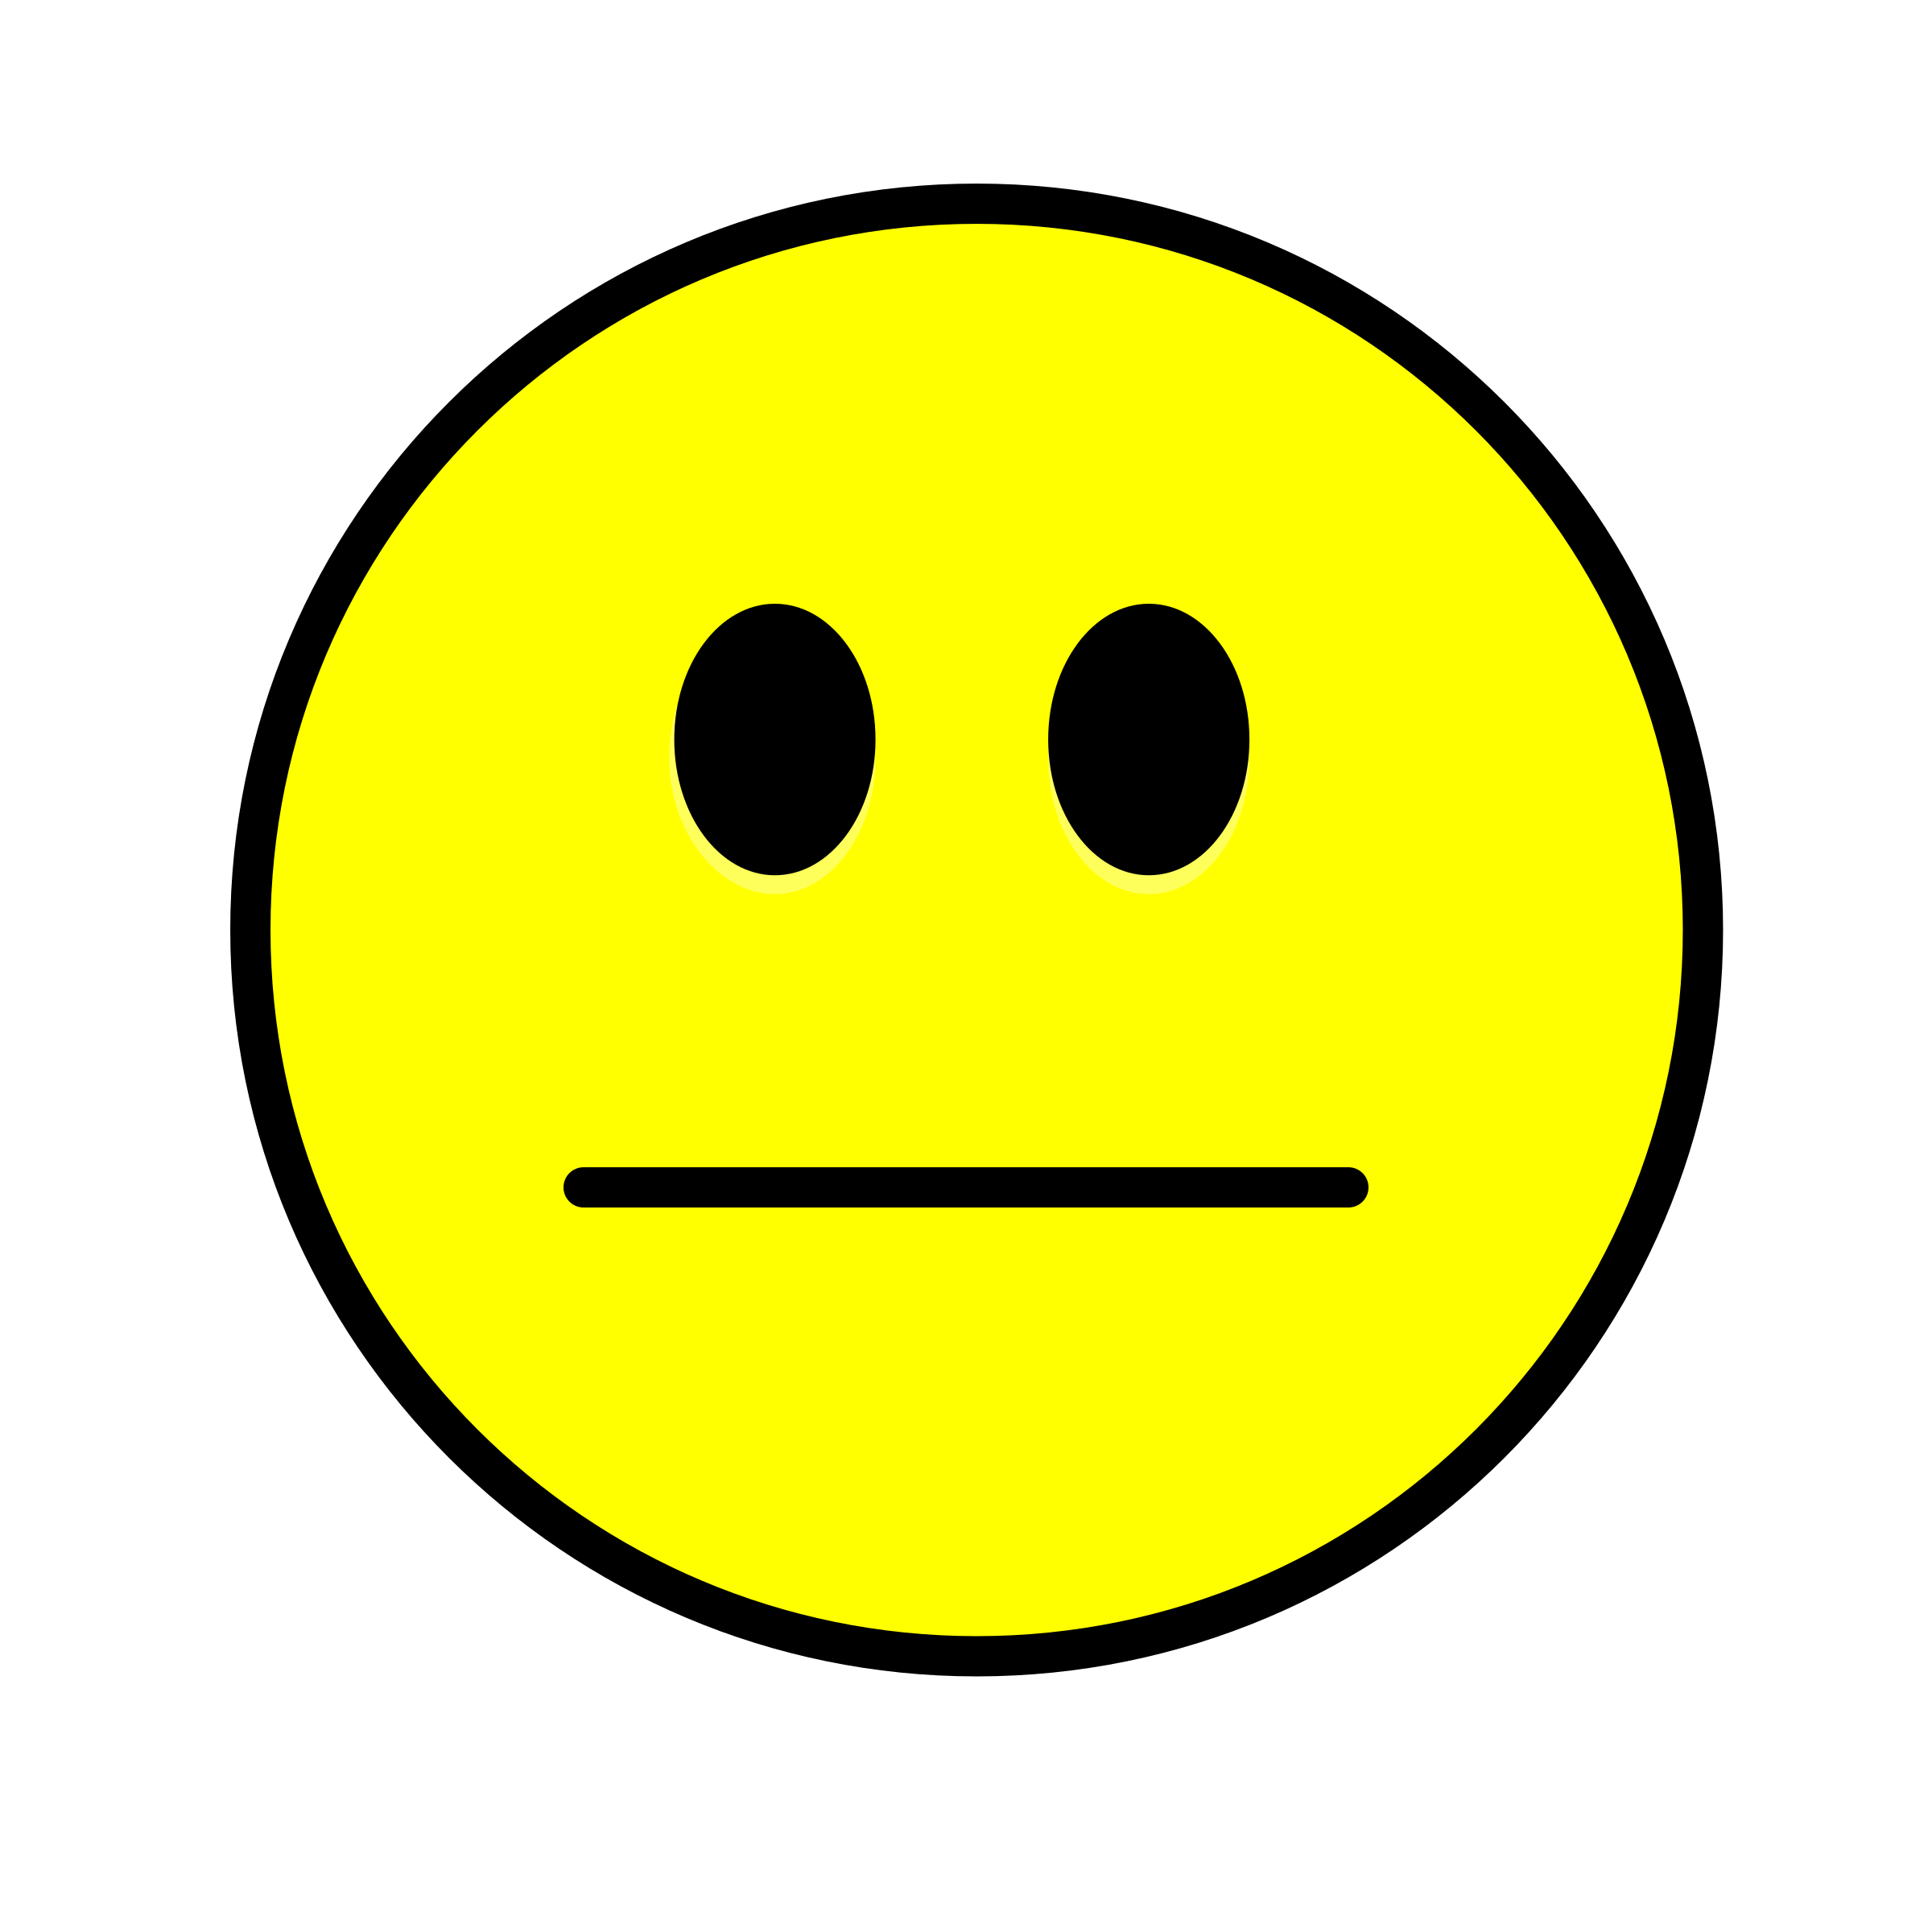 plain_smiley_yellow_simple.png